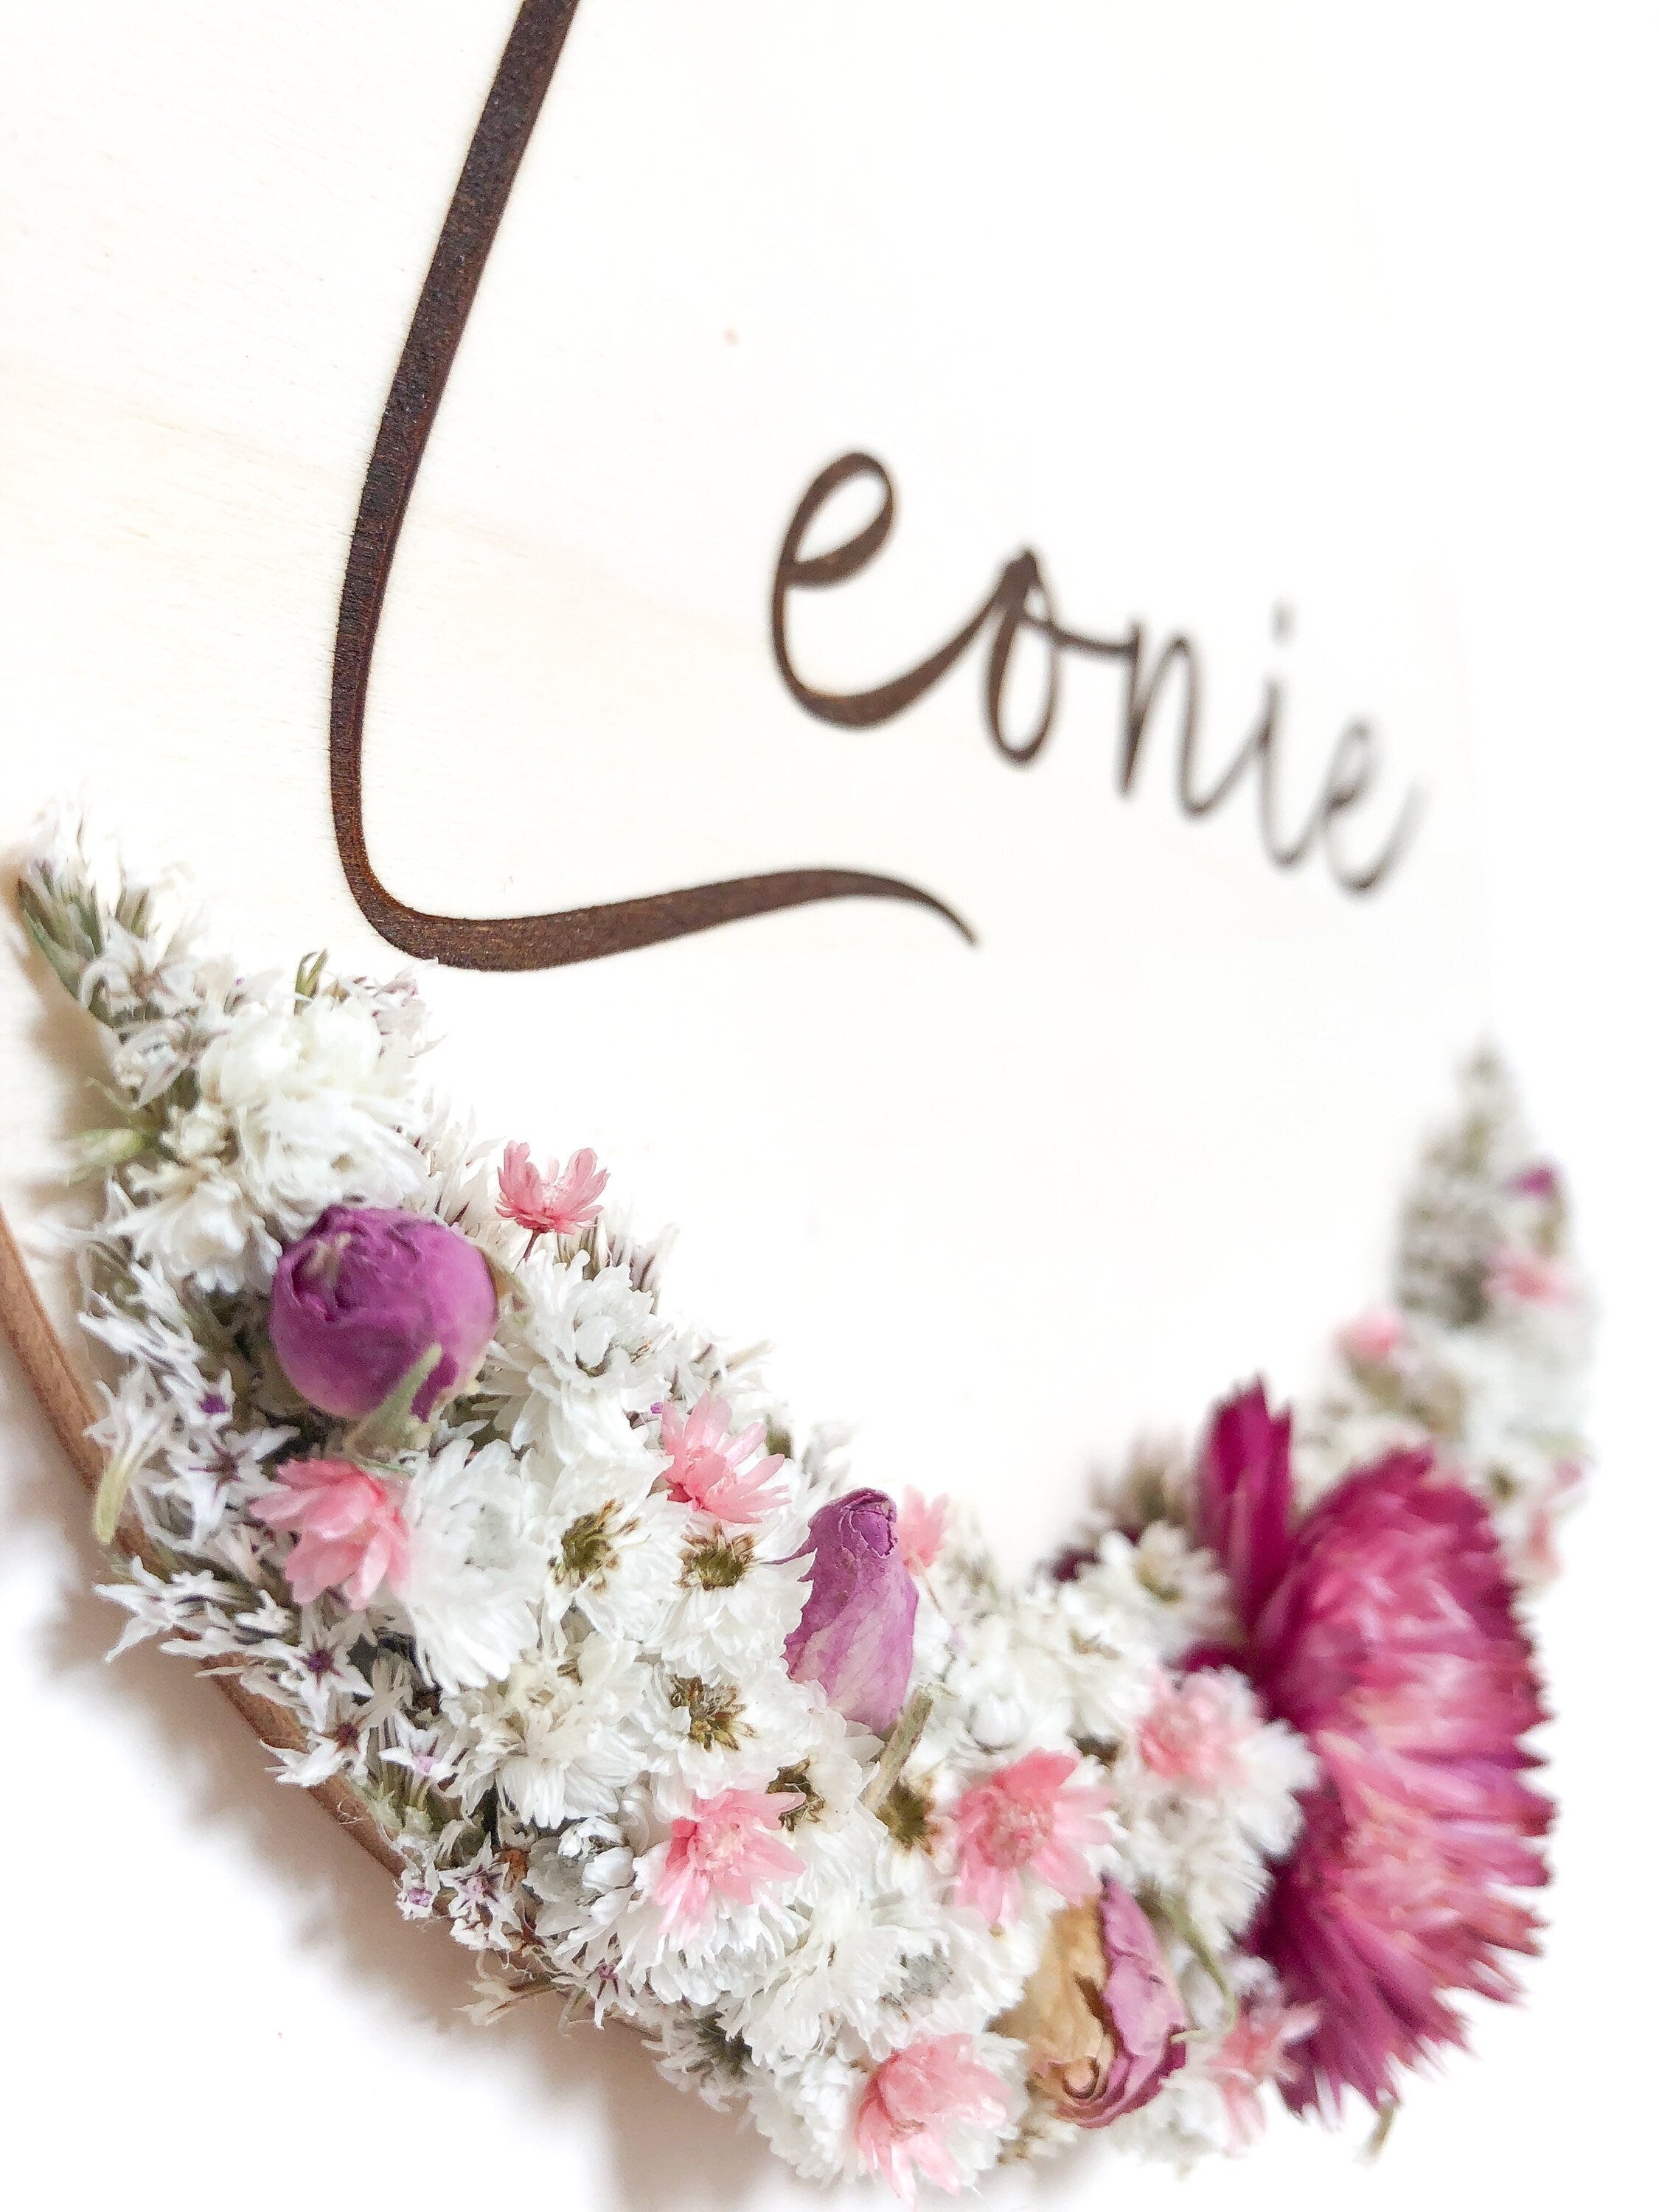 Name tag personalized with dried flowers